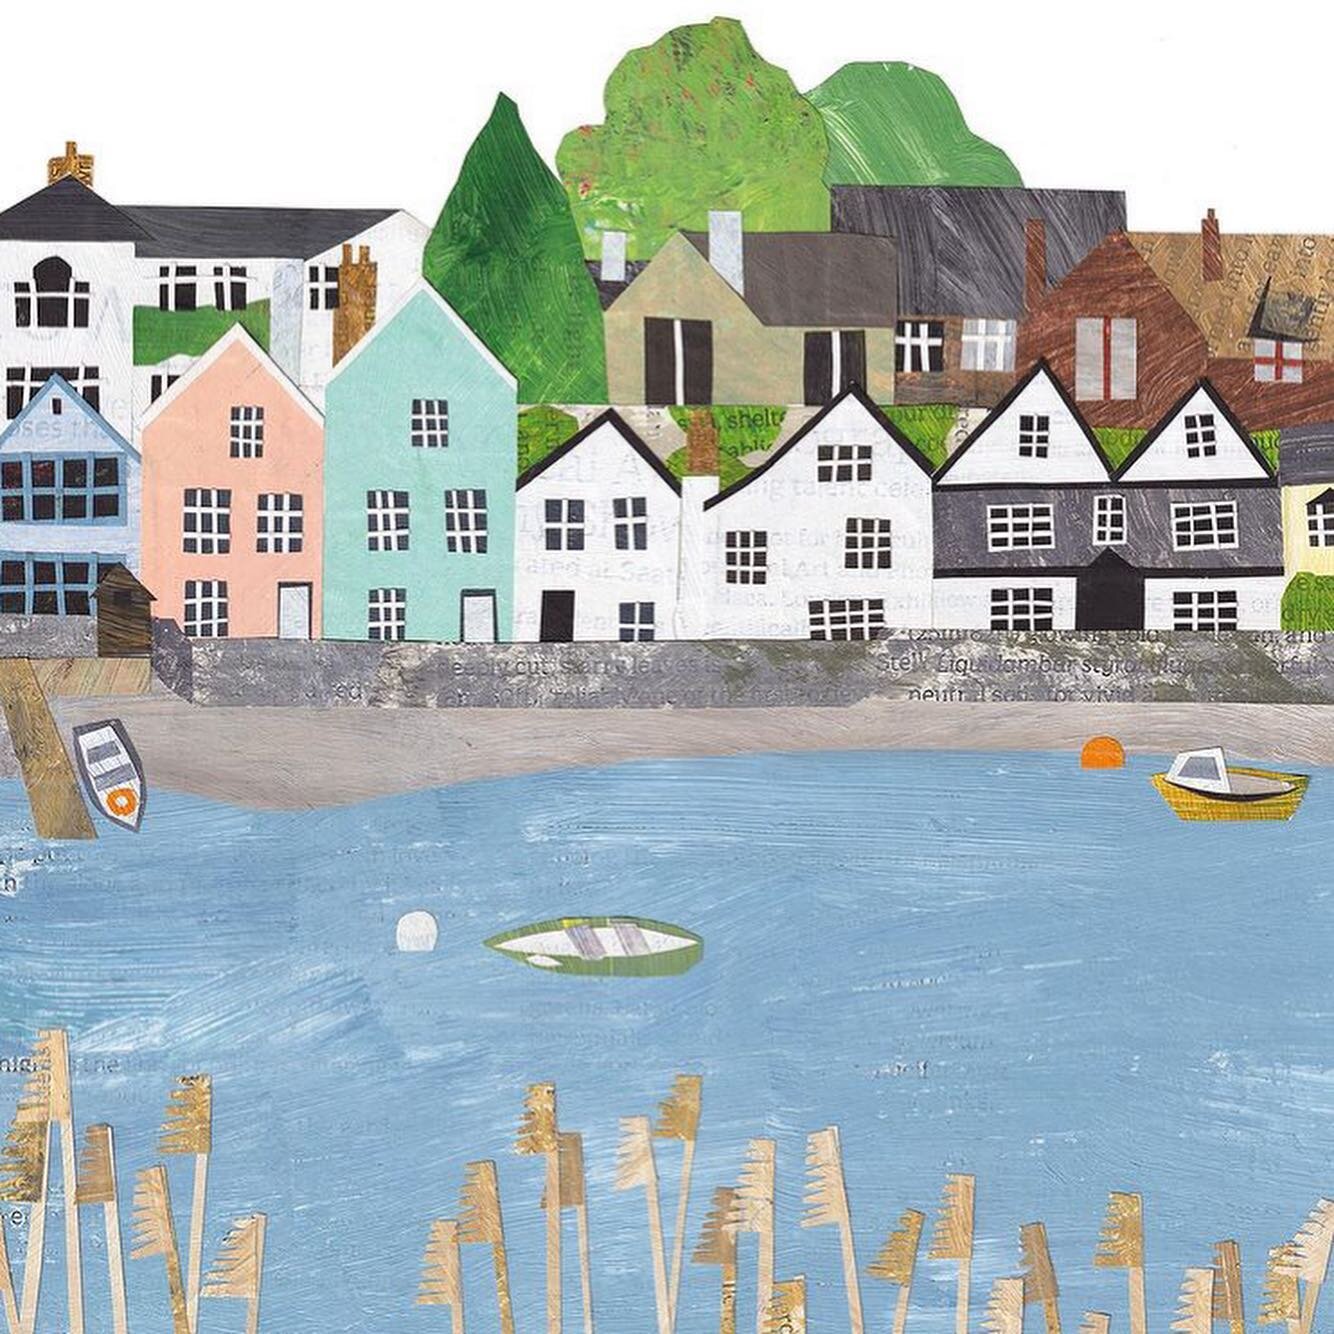 10 Days to go!
Topsham
Illustration and Print Fair
Sunday 11 September
10.30 - 4.00pm
Matthews Hall, Topsham, Devon

The debut of this wonderful print by @plantpaperscissors will be at the Fair. A view of Topsham from across the estuary.

We&rsquo;re